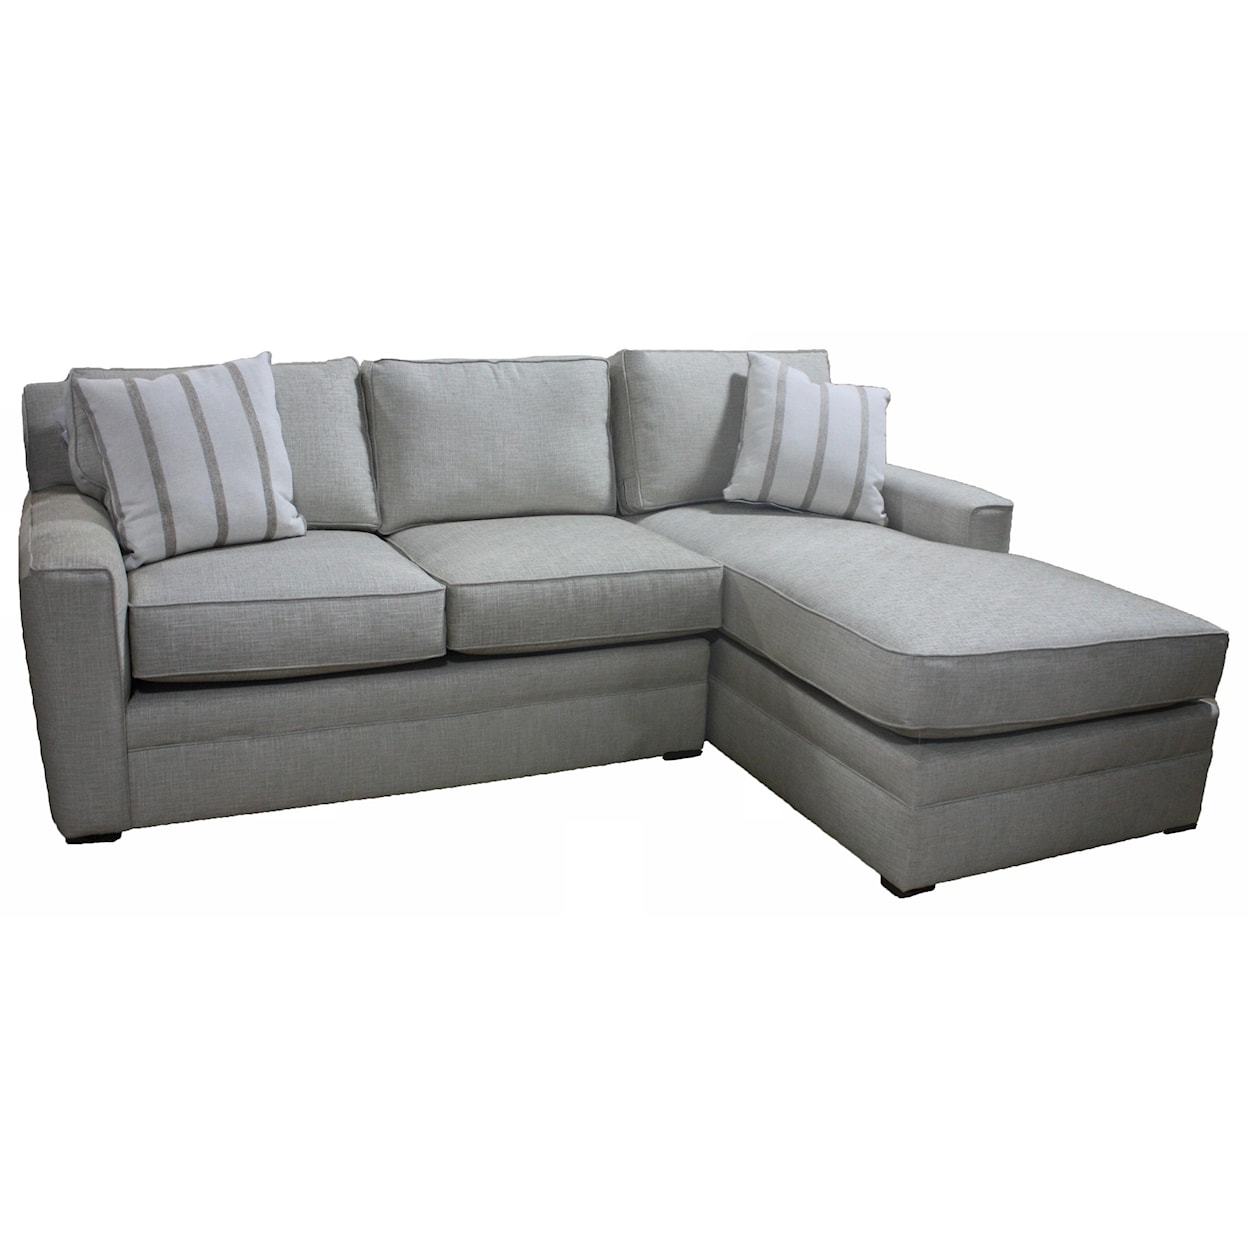 Stone & Leigh Furniture Riley 2 PC Sectional with a Chaise